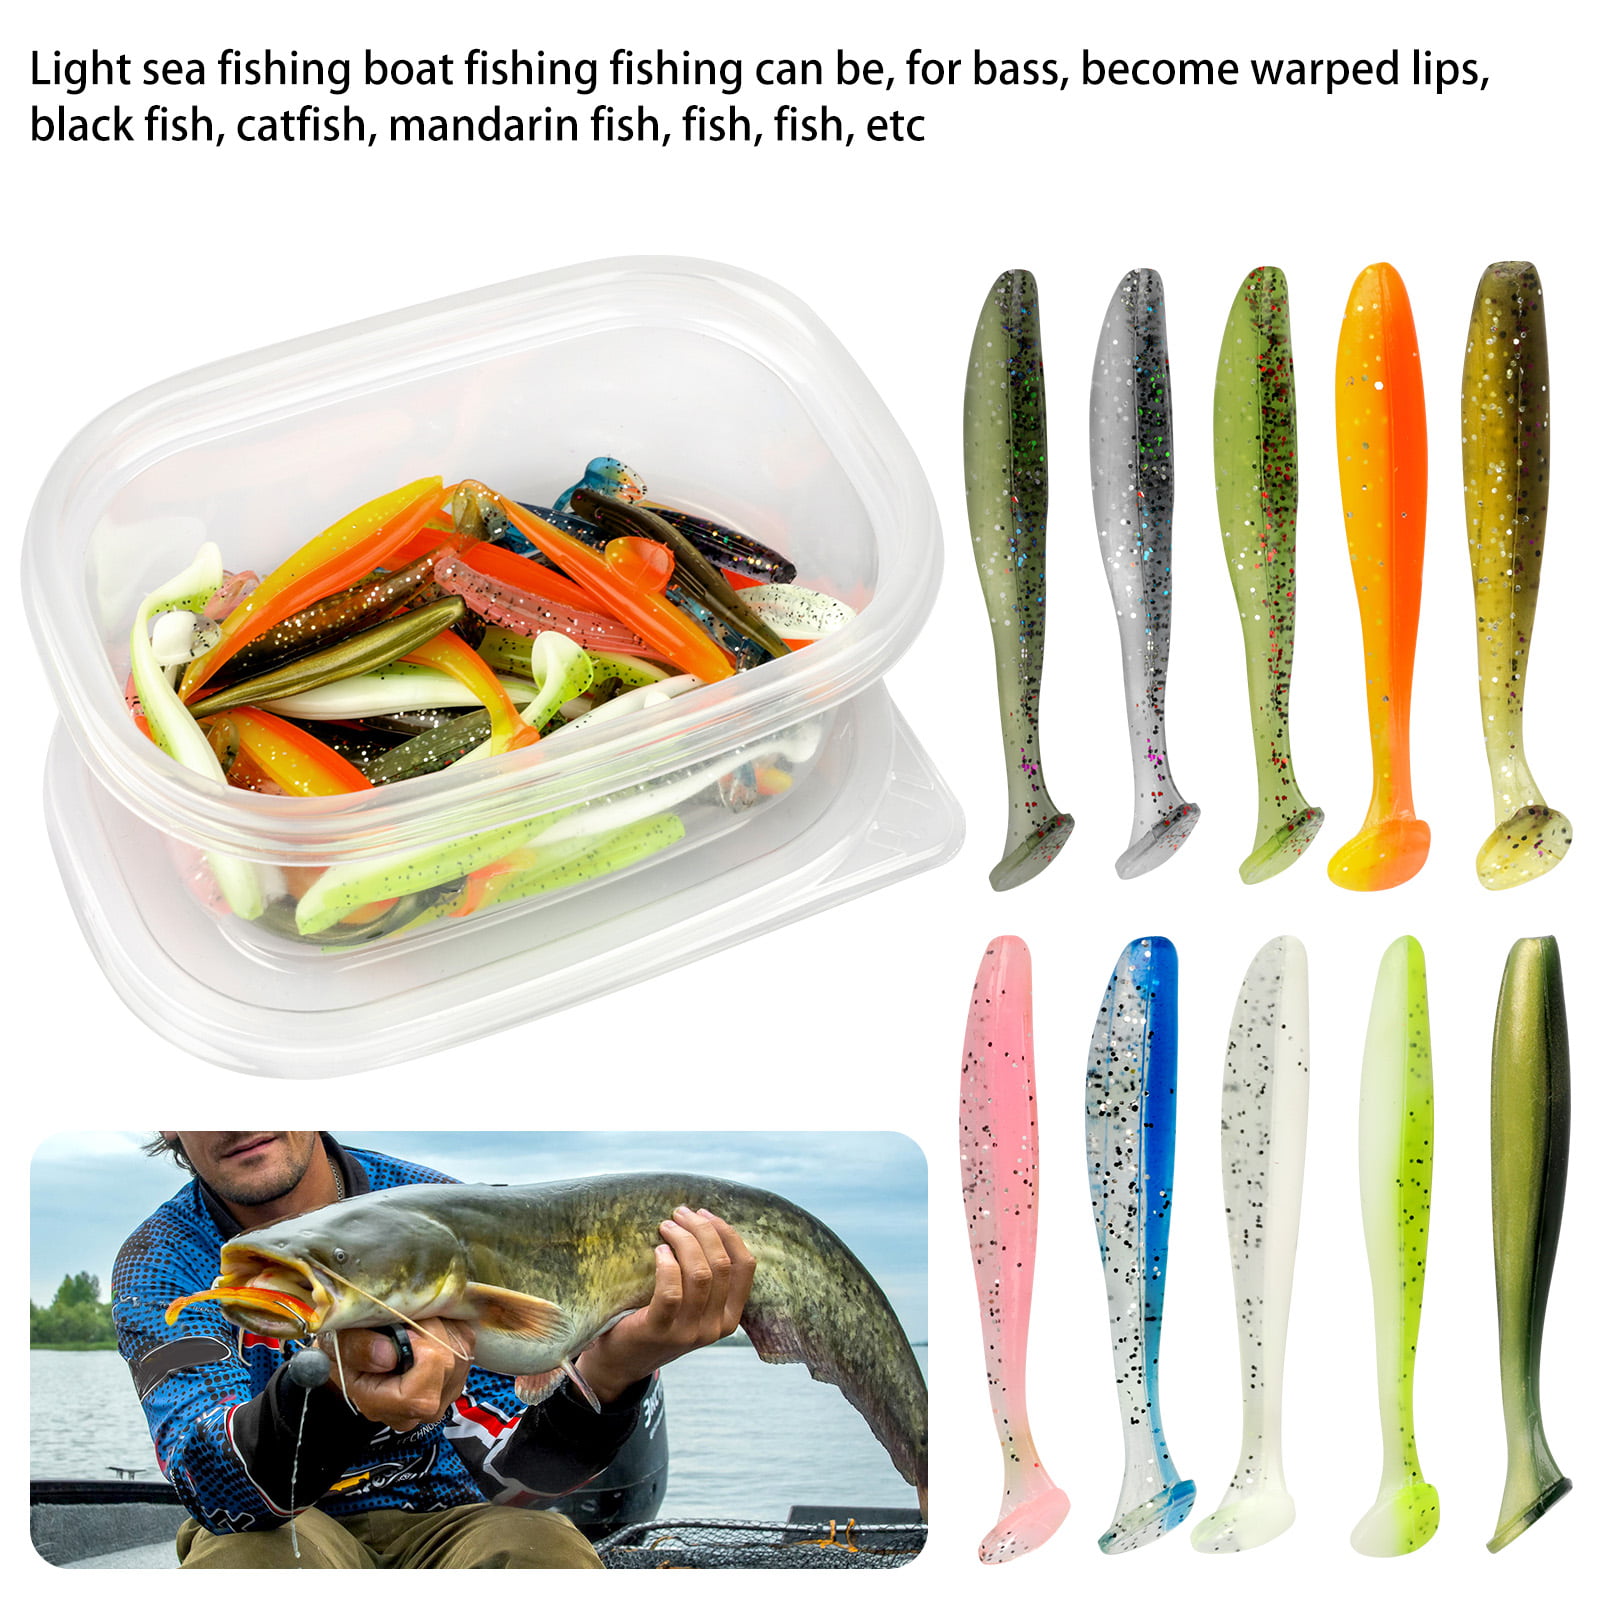 100/50PCS Soft Fishing Lures, TSV 2 T-tail Soft Baits Kit Stinger Shade  Grubs Assorted Mixture Crappie Quiver Tail for Bass, Hook Slot, Trout